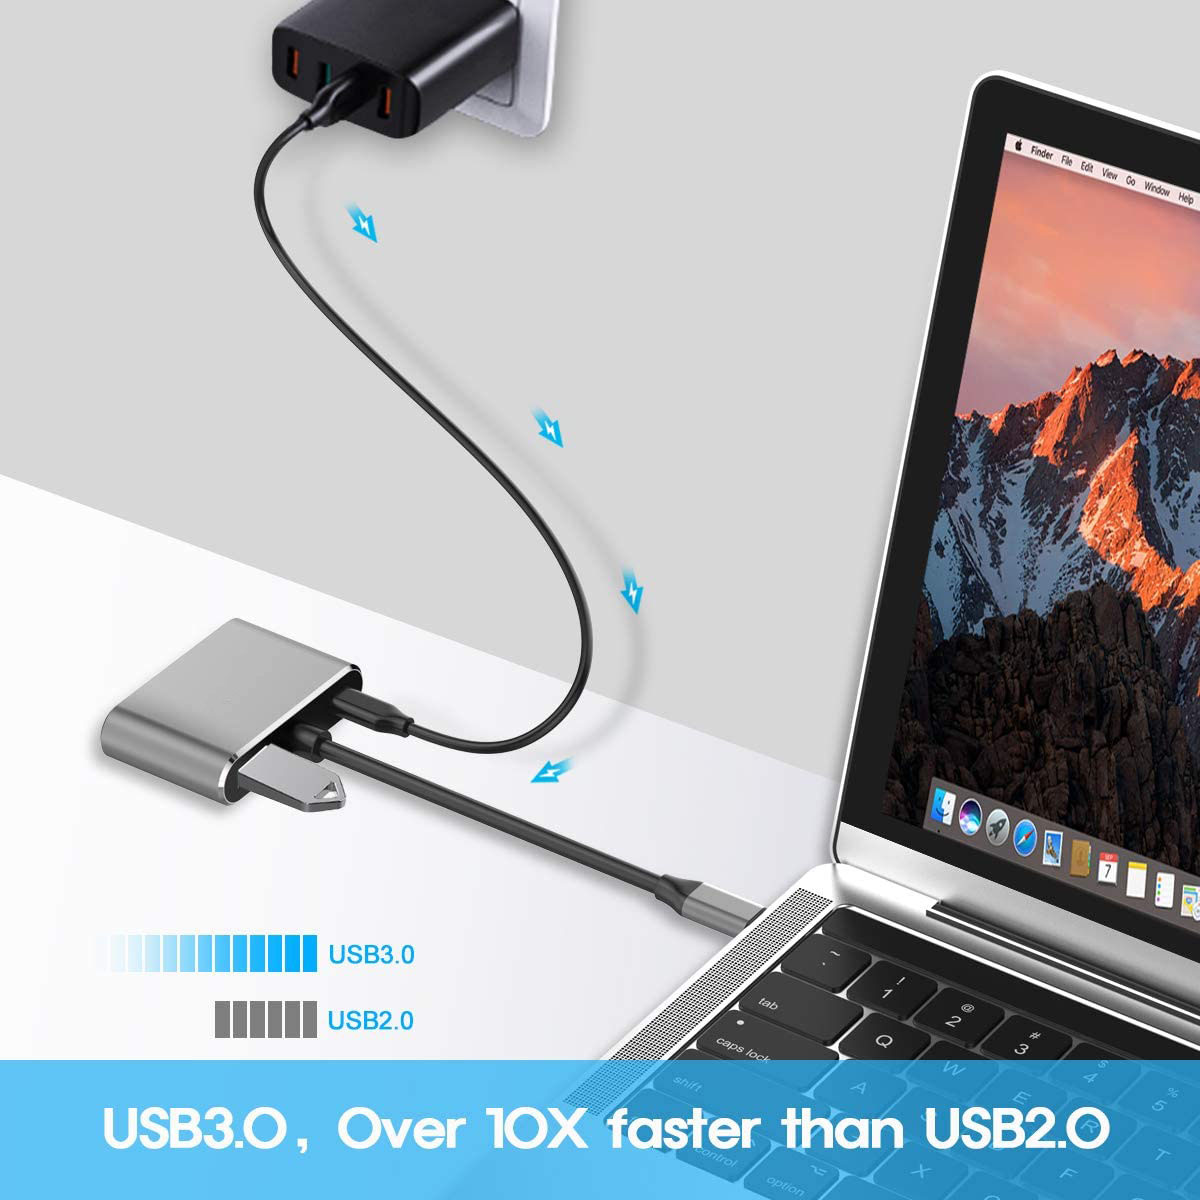 HF-UCA41: USB C to 4K HDMI VGA Adapter 4-in-1 Type C Hub with USB 3.0 Charging Power PD Port Compatible for Nintendo Switch/MacBook Pro/iPad Pro/Samsung Galaxy/Dell XPS